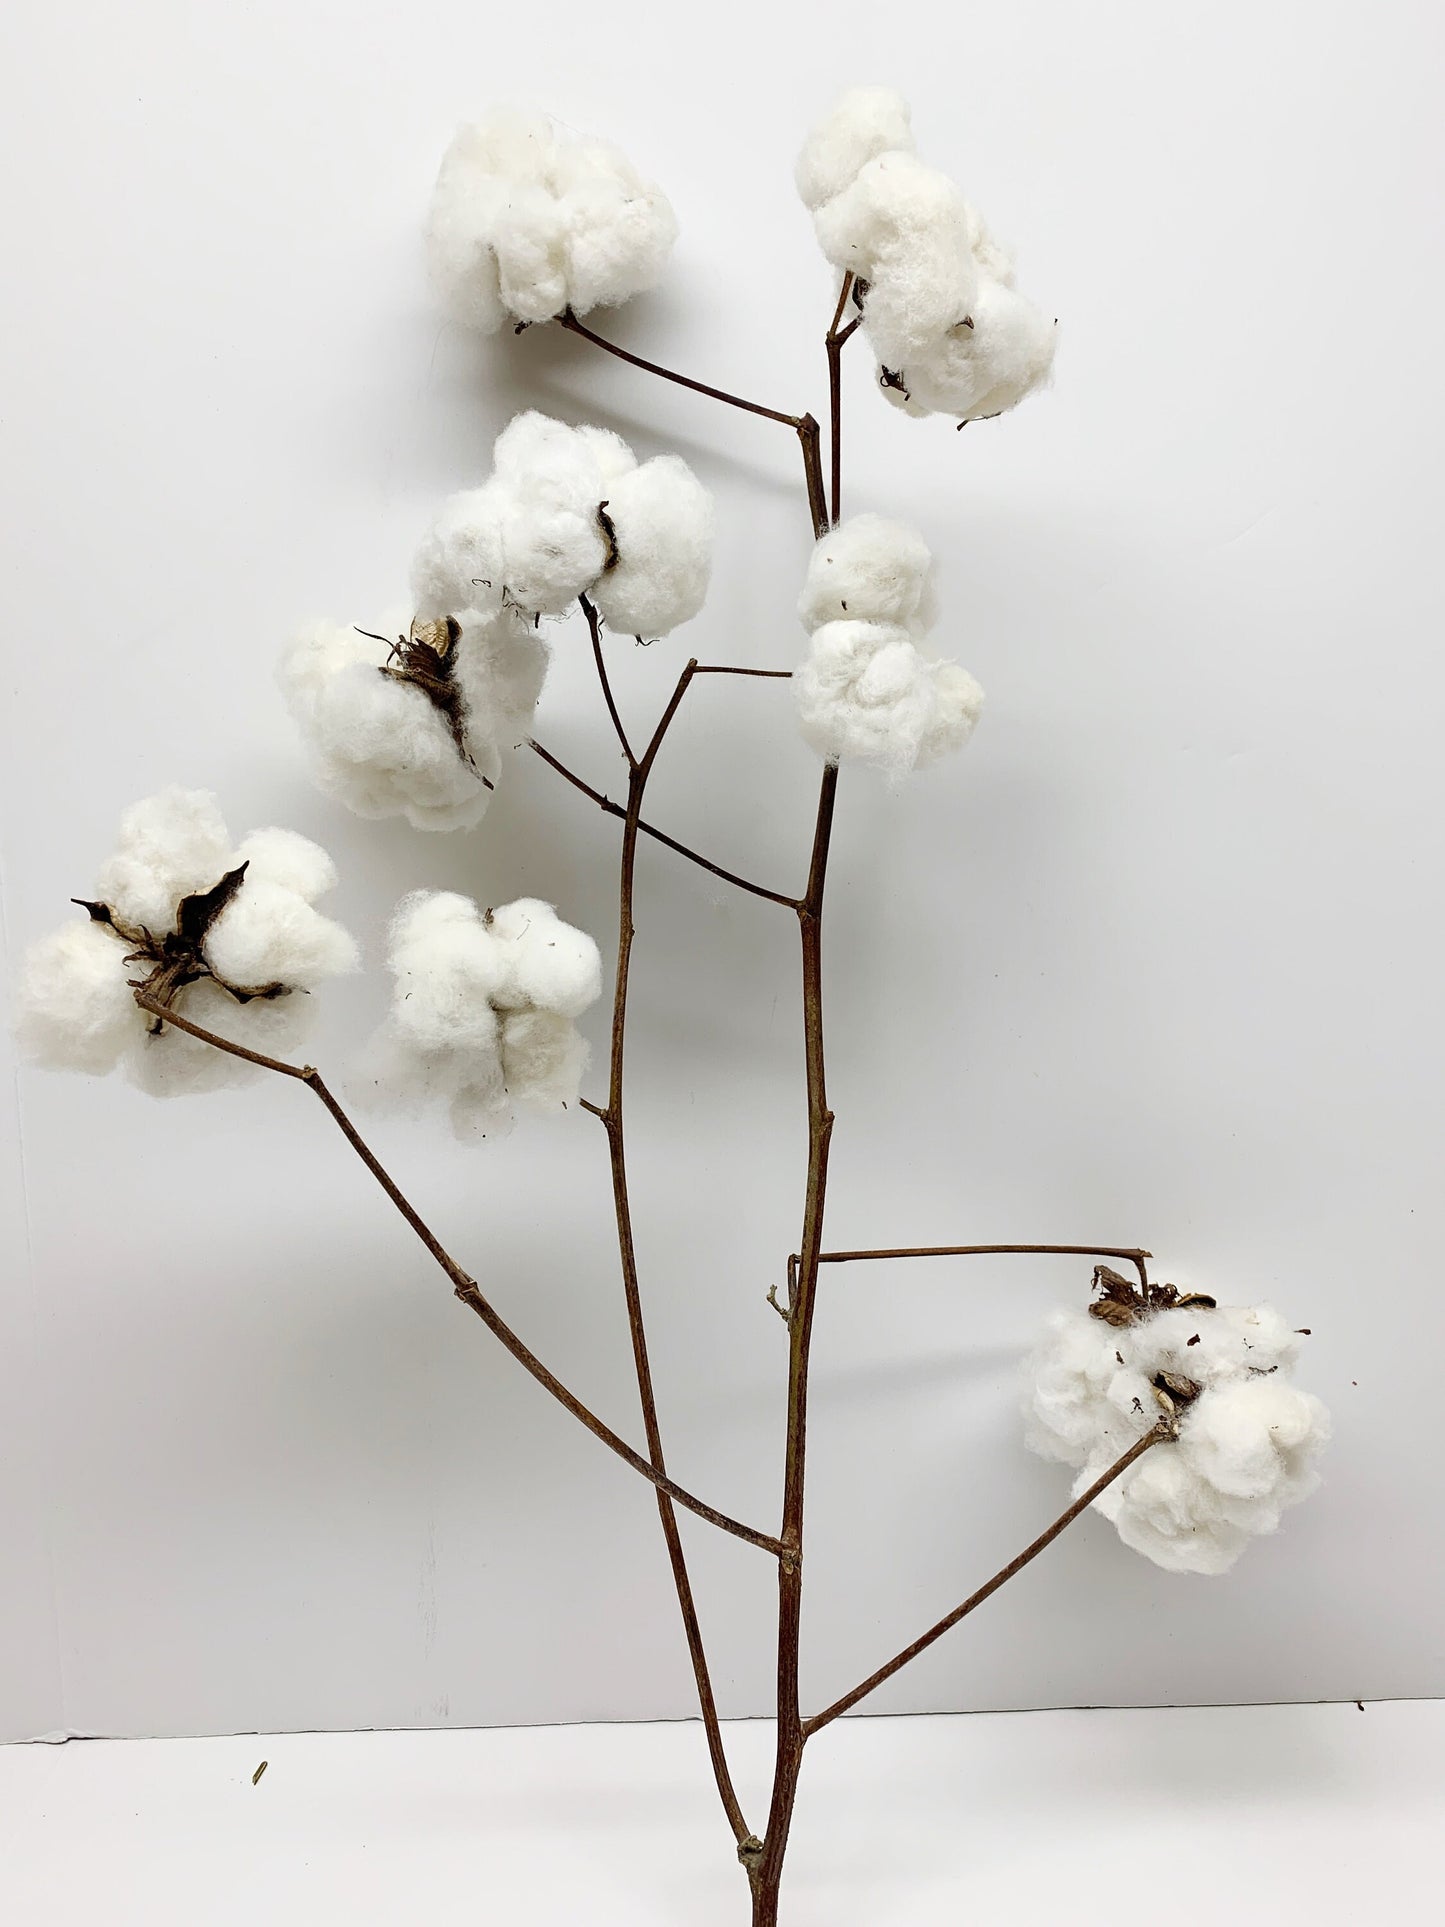 Real Cotton Stems, Natural Cotton, Heads, White, House Decoration, Wedding, REAL, Branches, Cotton Seeds, Cotton Branches, Cotton Stems